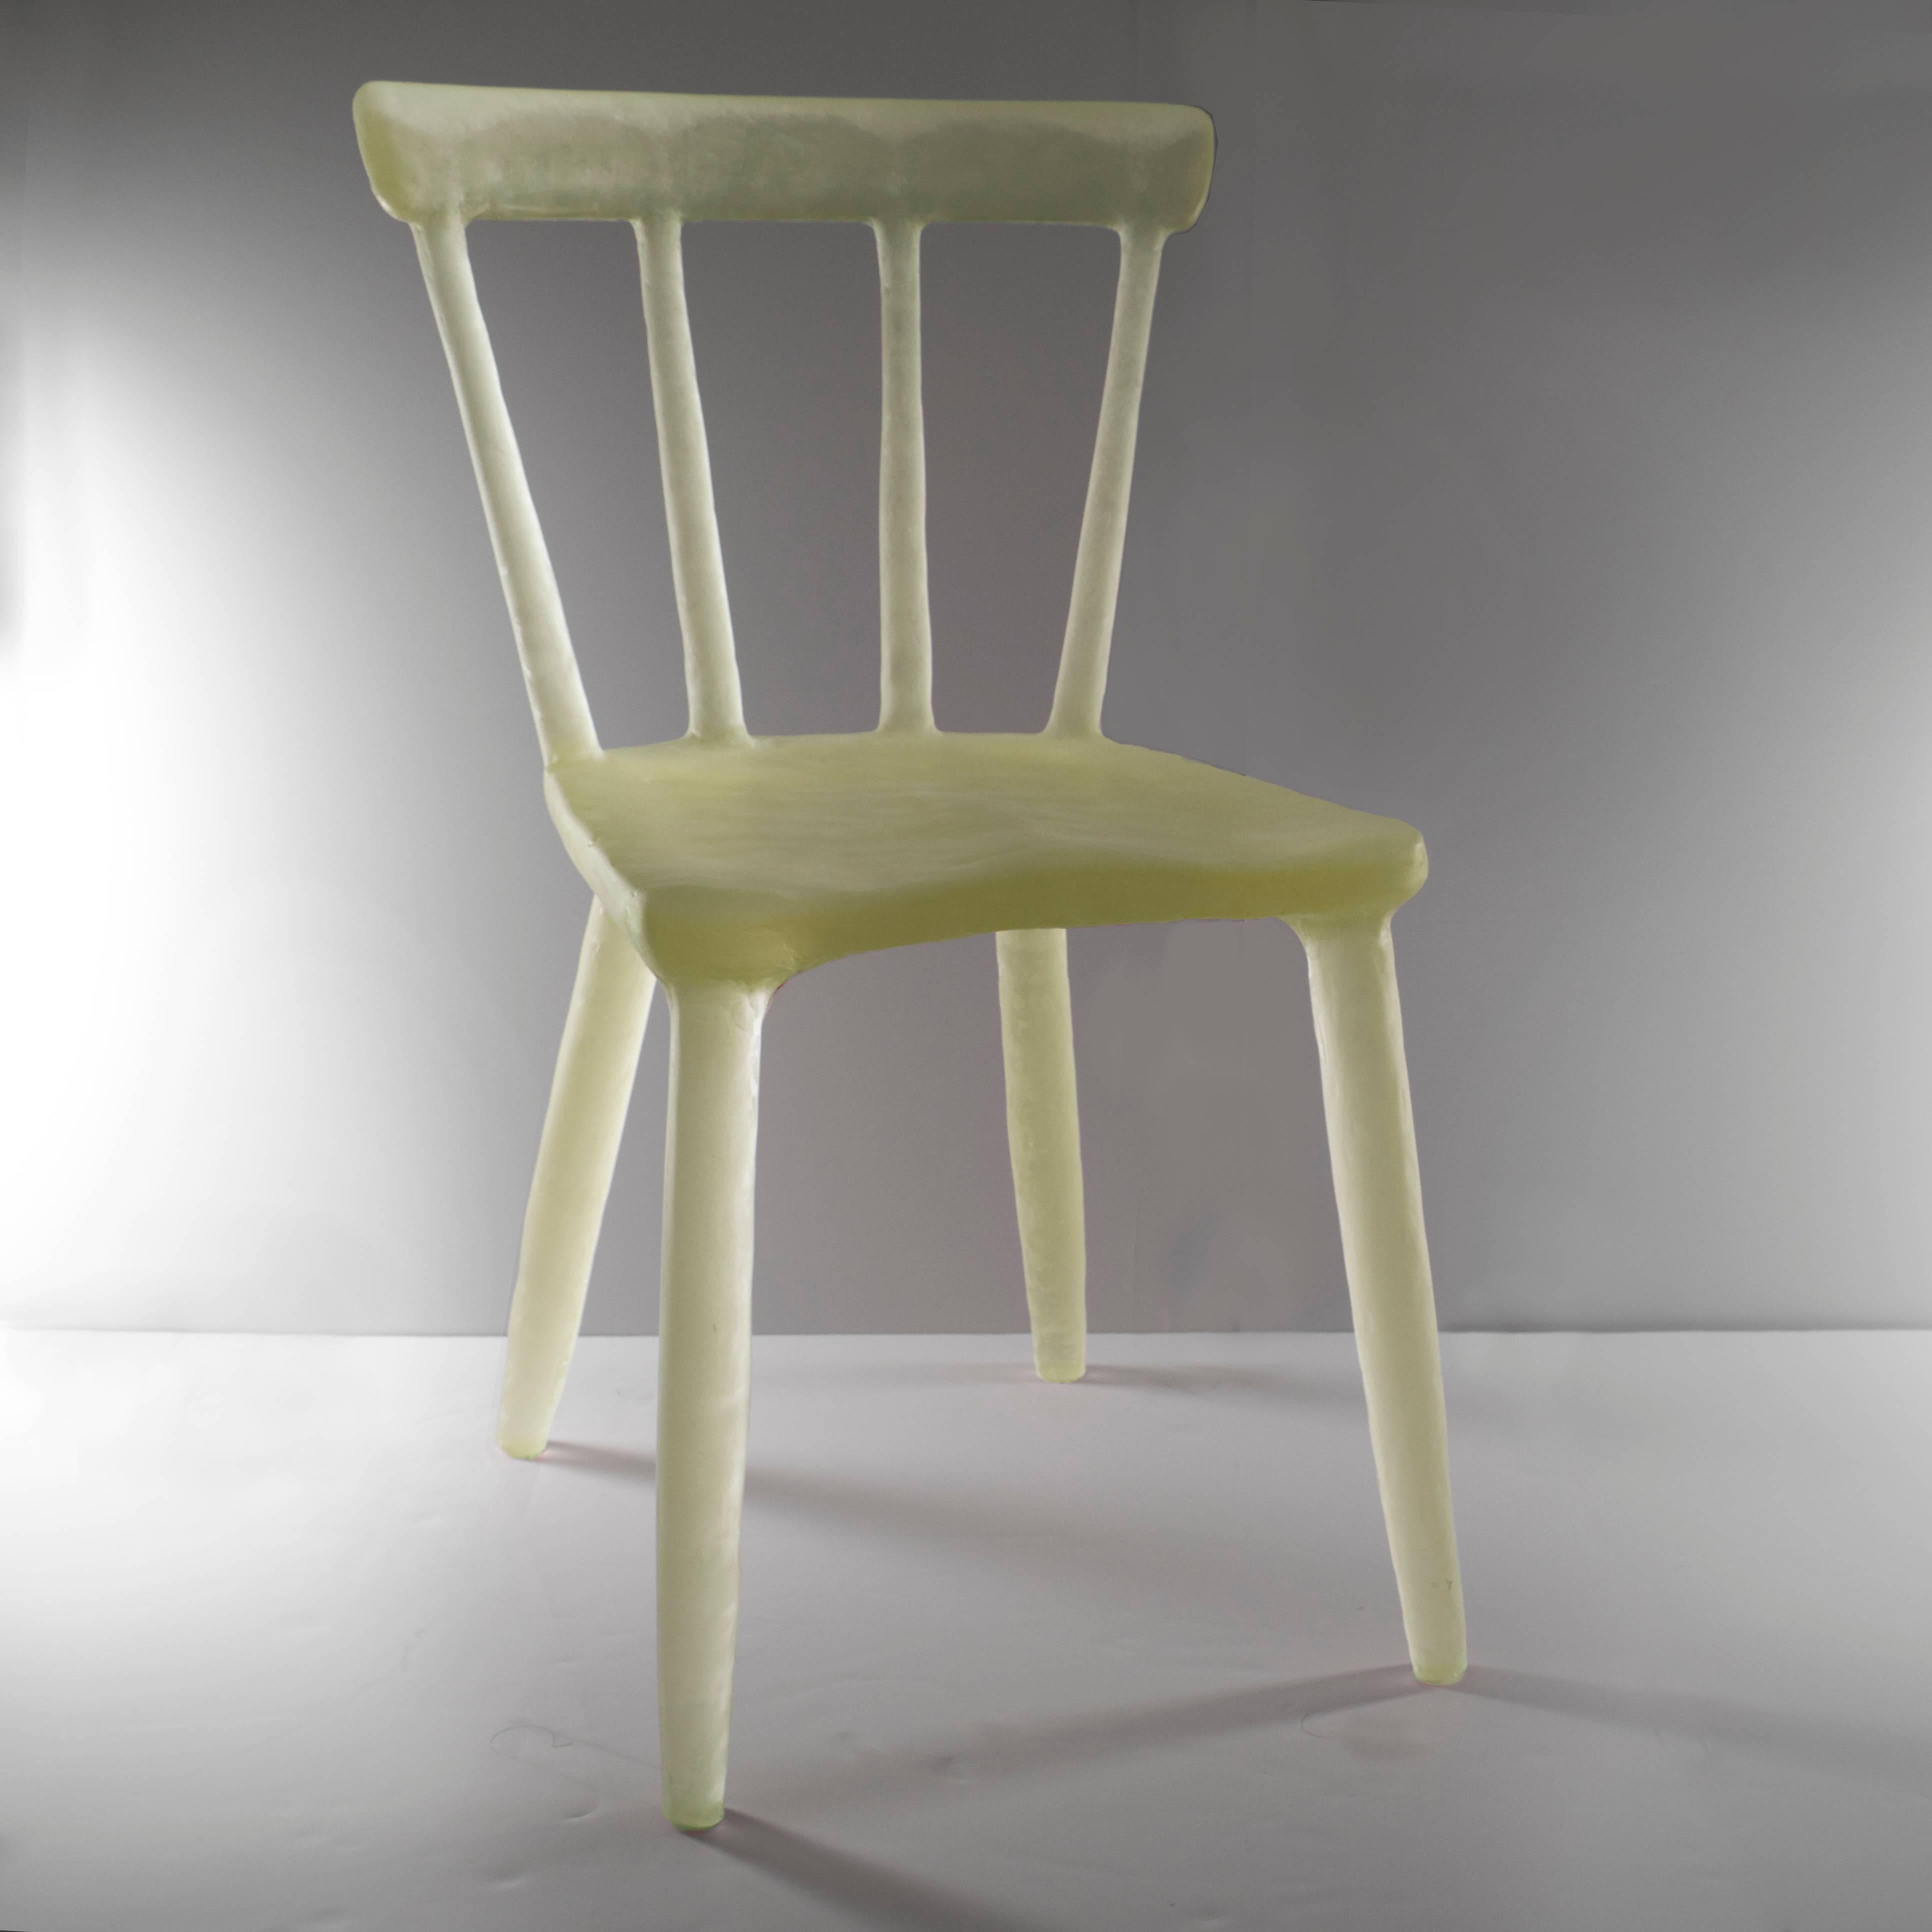 Glow Chair by Kim Markel in Yellow, Handmade from Cast Recycled Resin / Acrylic In Excellent Condition For Sale In Beacon, NY